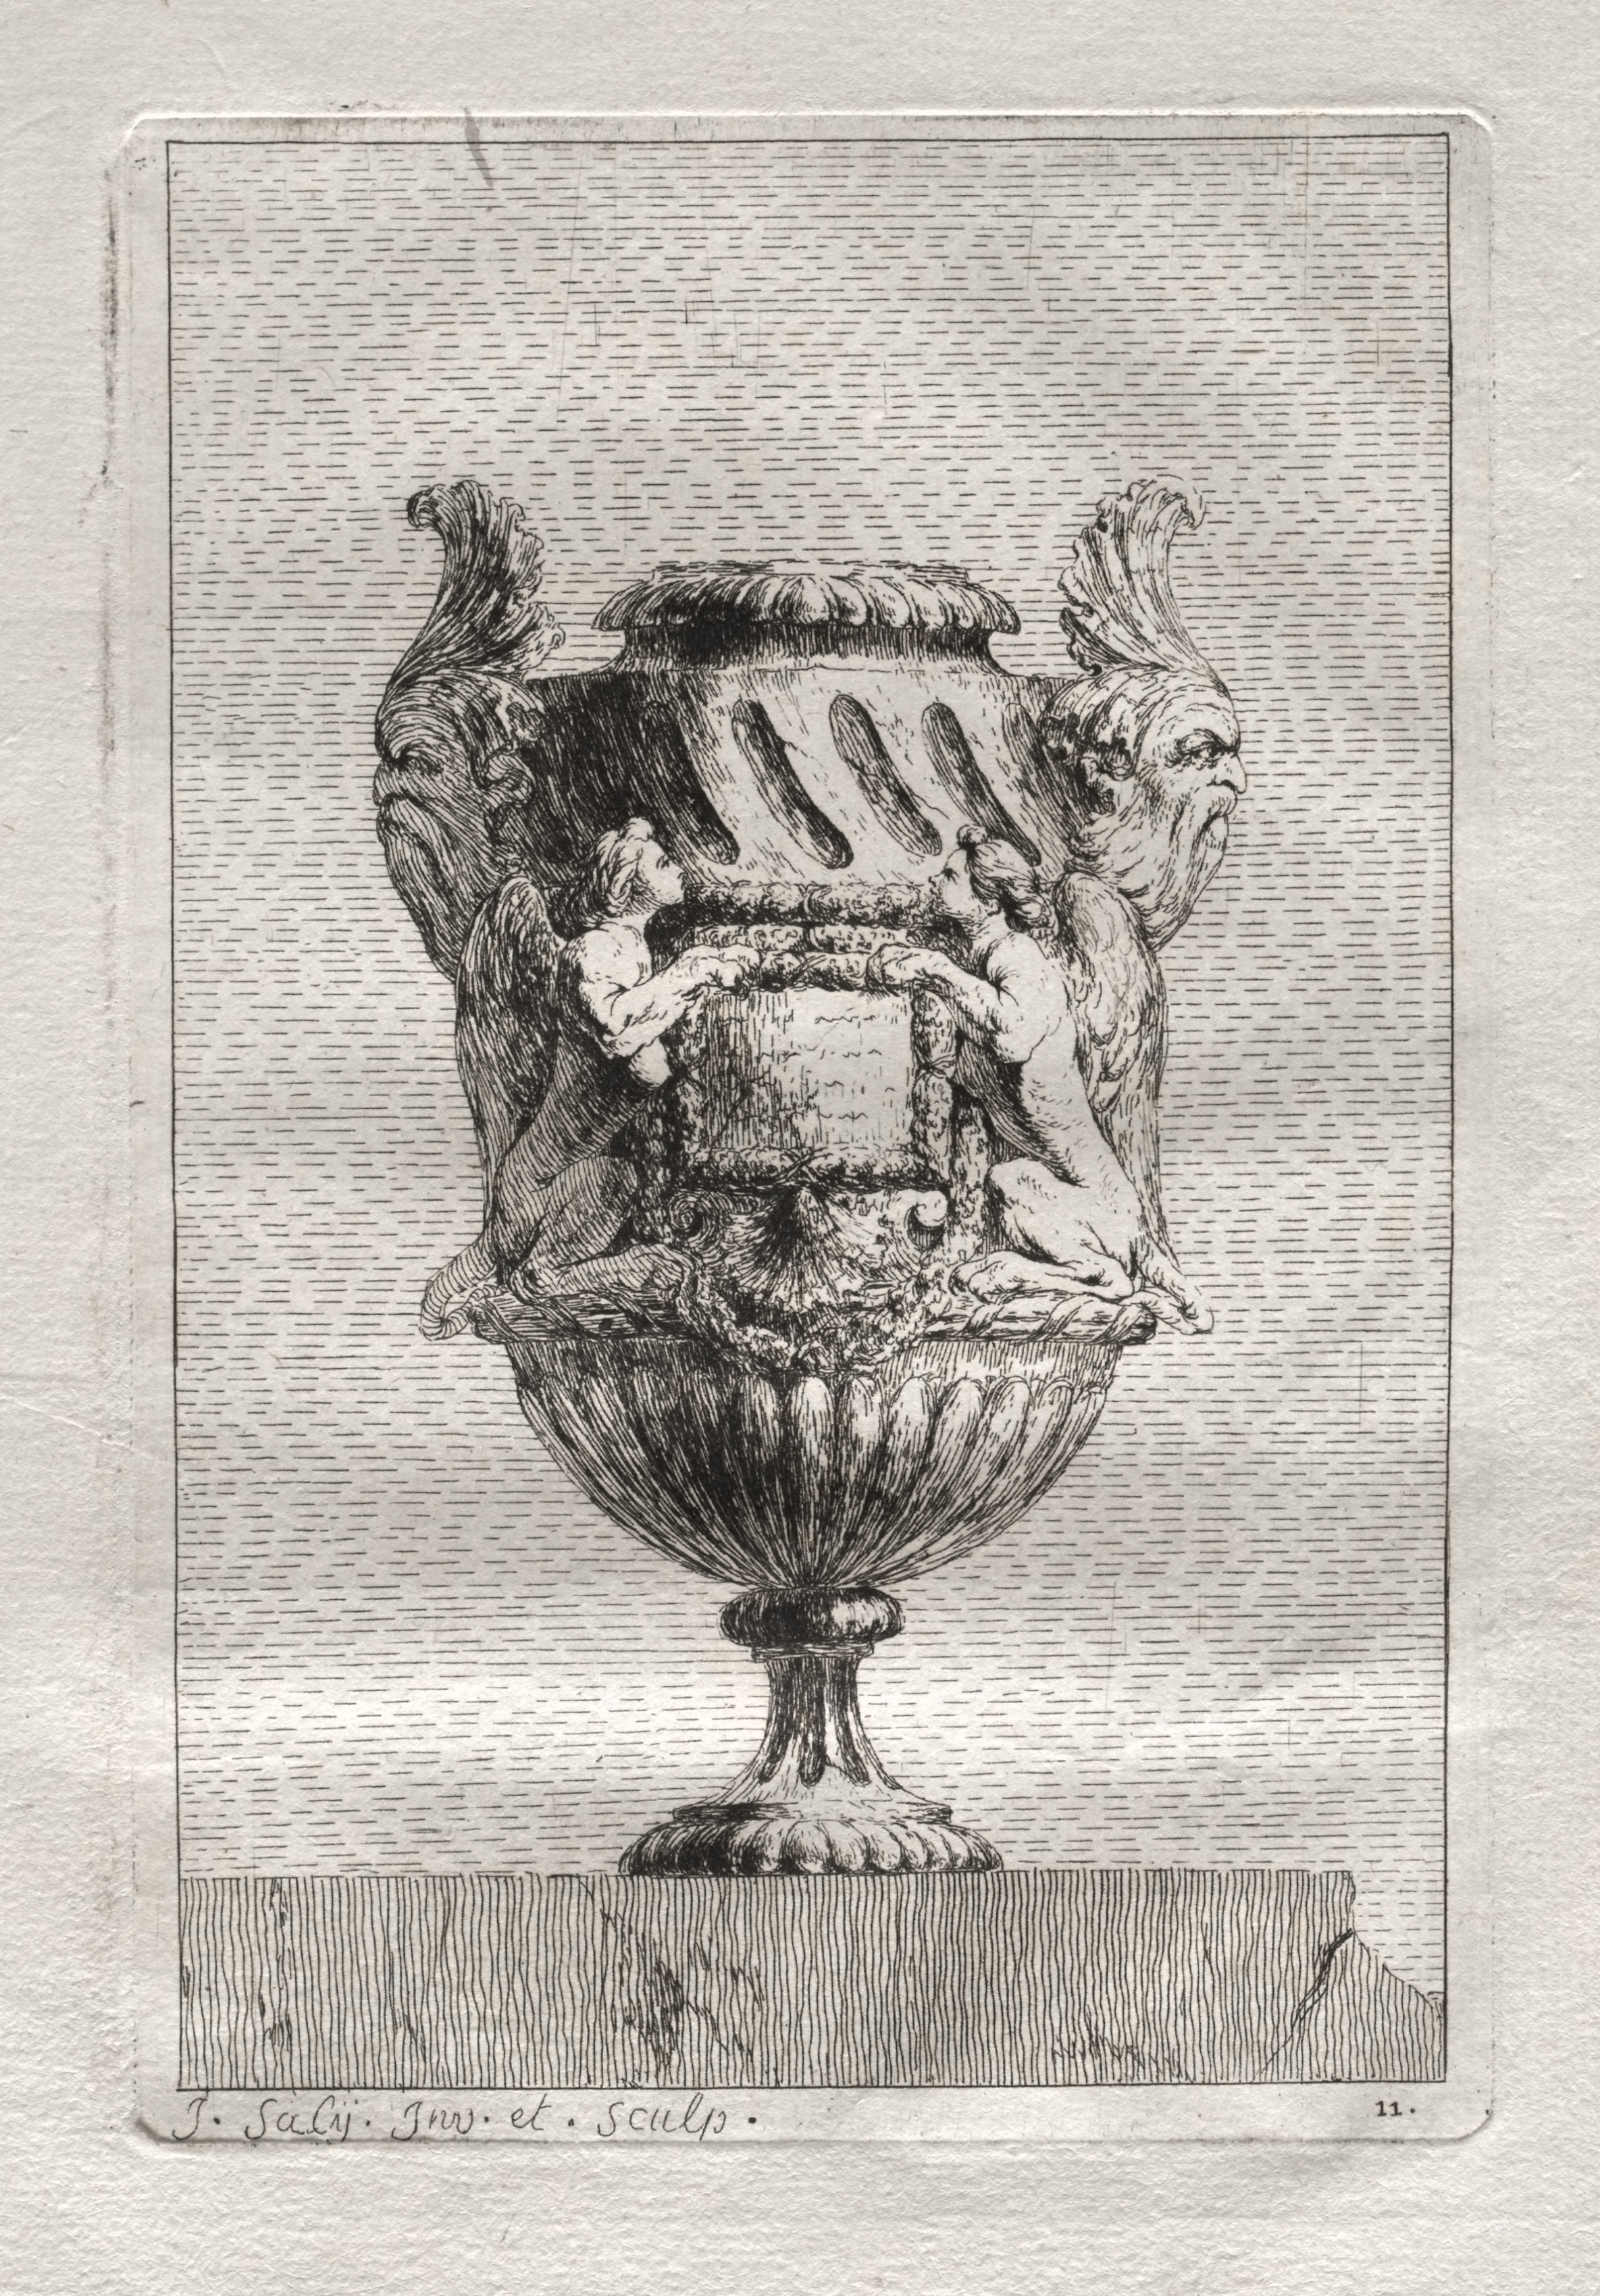 Suite of Vases:  Plate 11